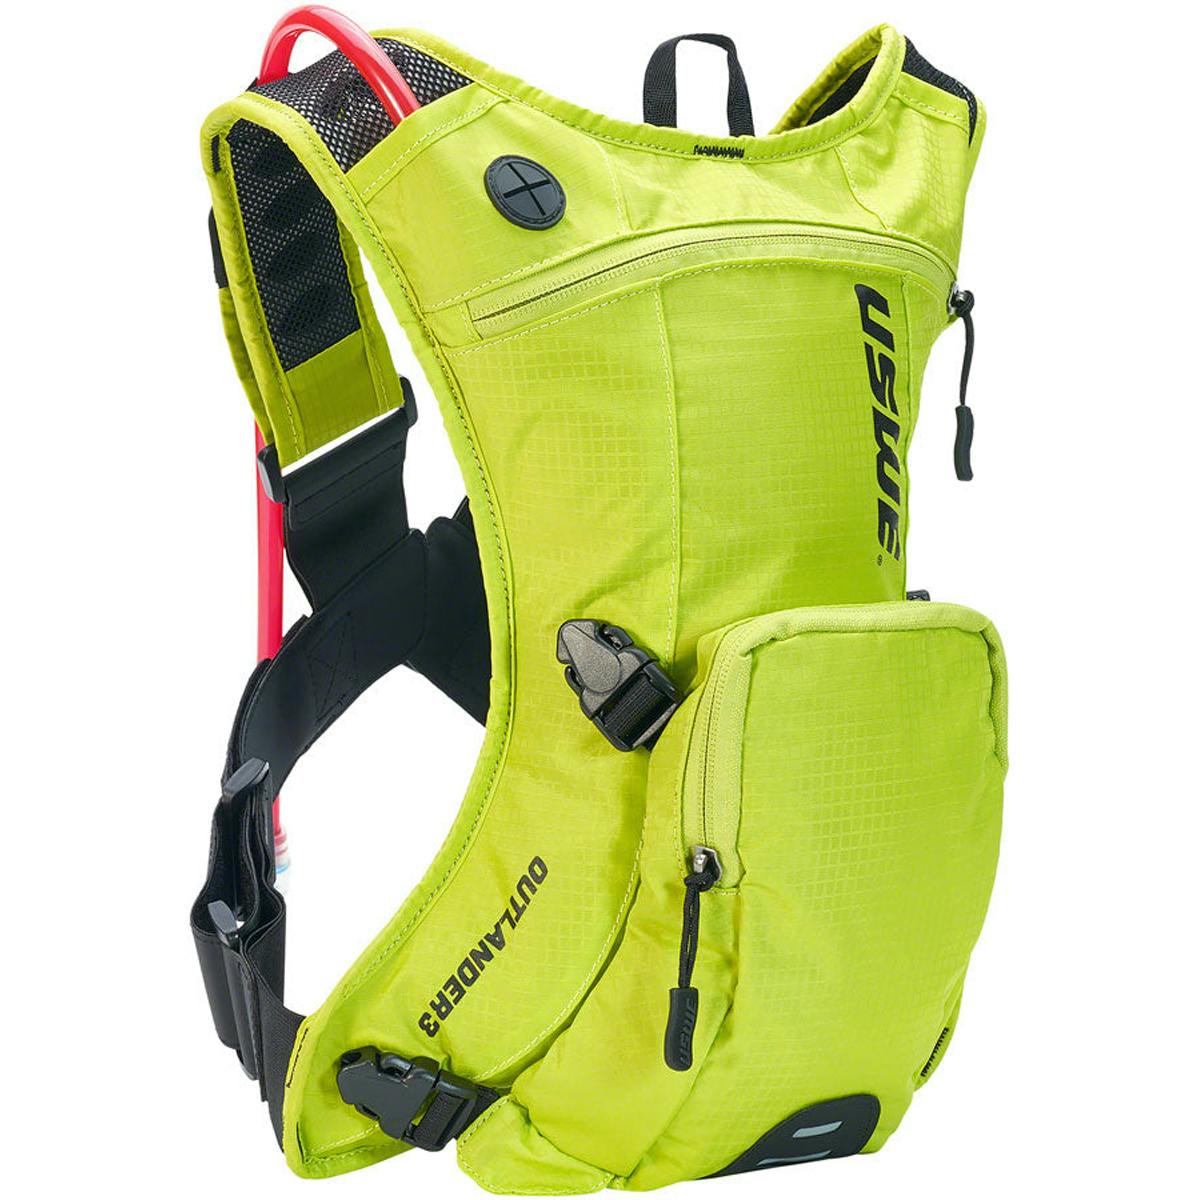 USWE Outlander 3 Hydration Pack - Crazy Yellow - 3L